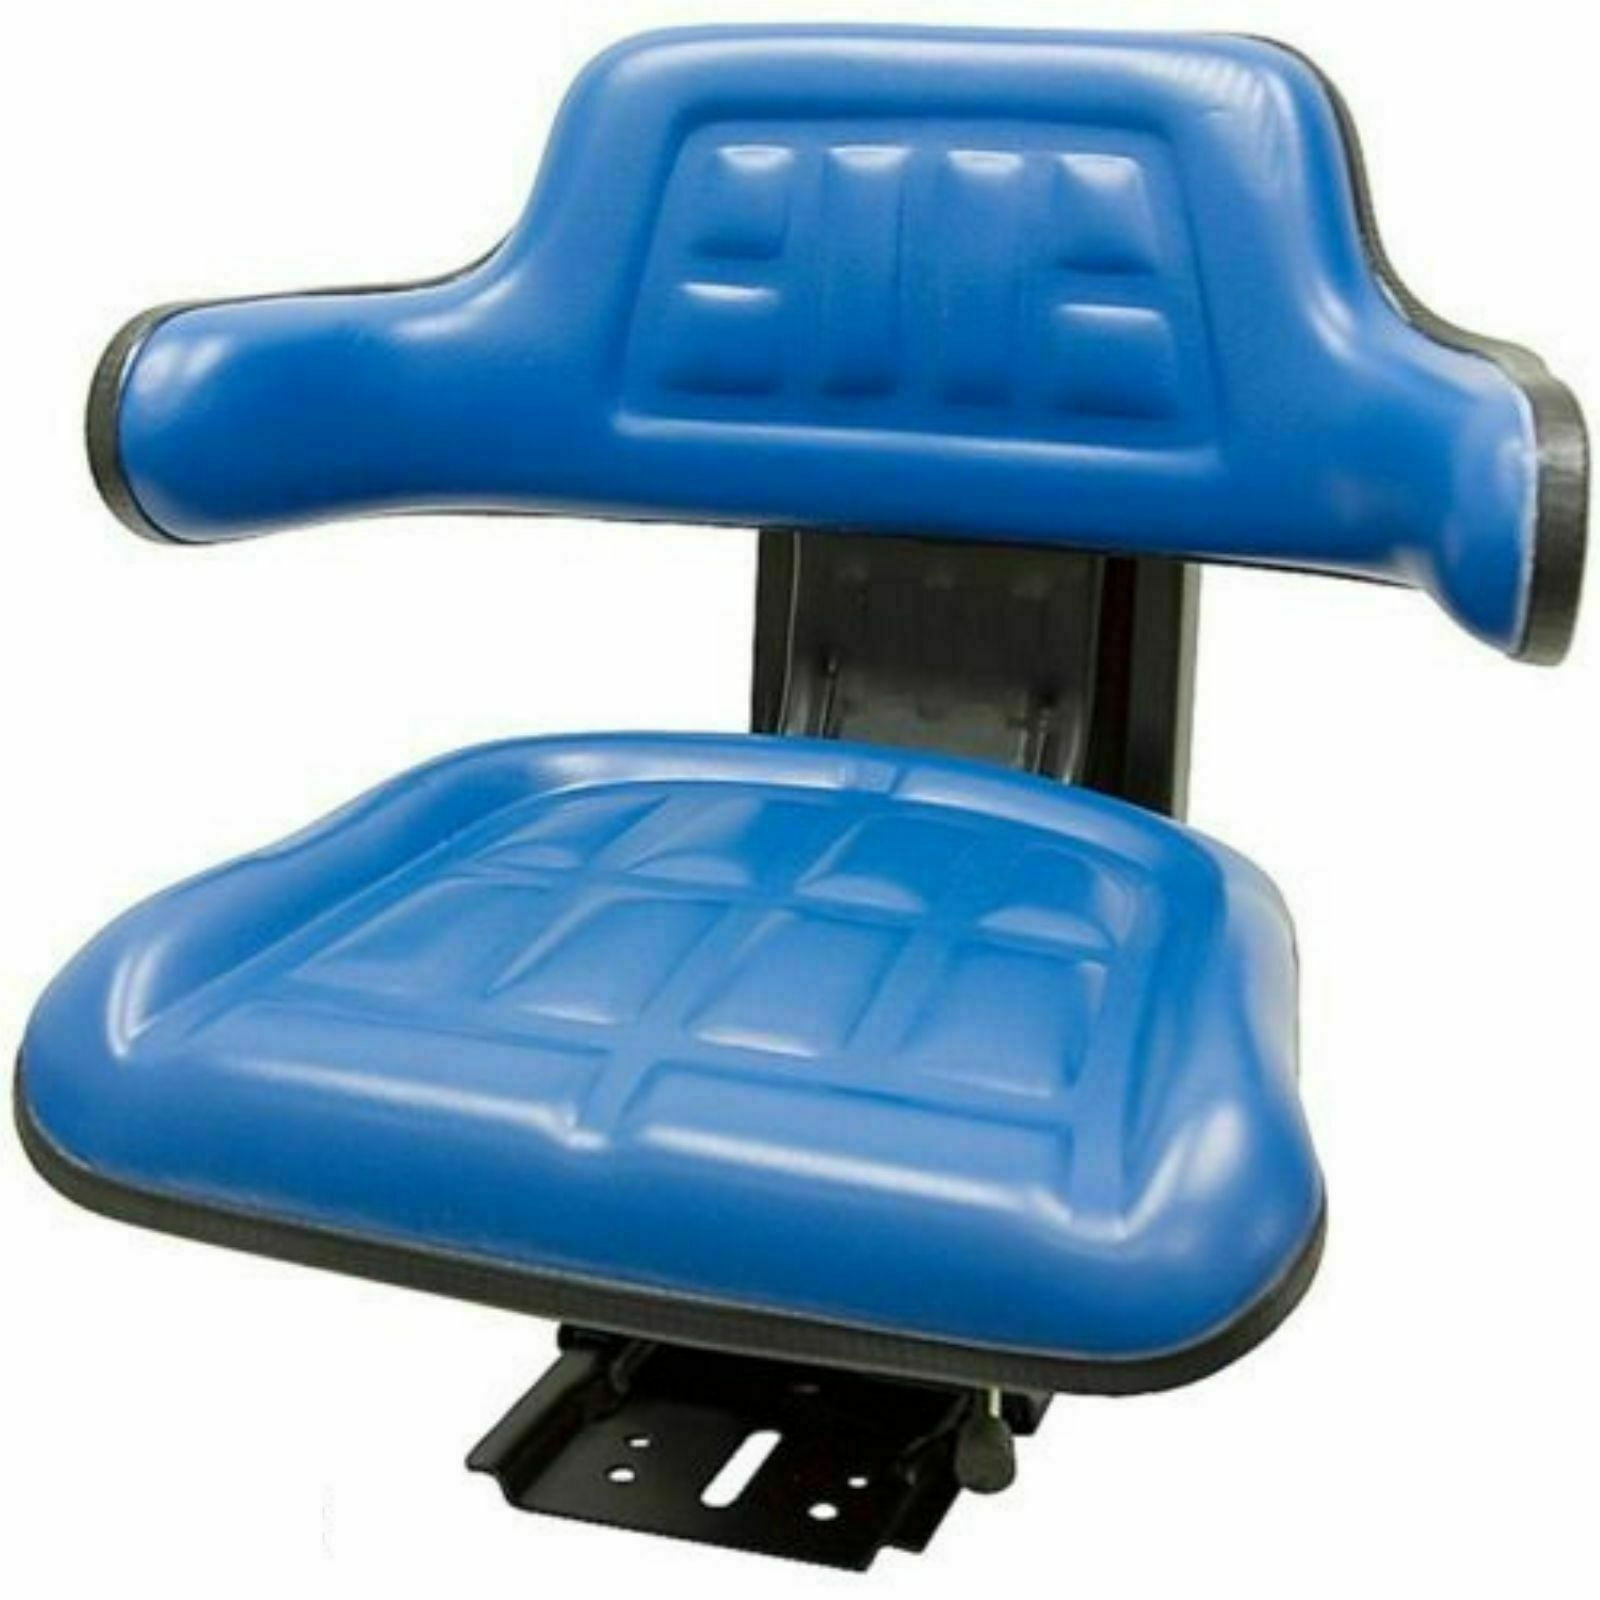 Blue Tractor Suspension Seat Fits Ford / New Holland 3000 3600